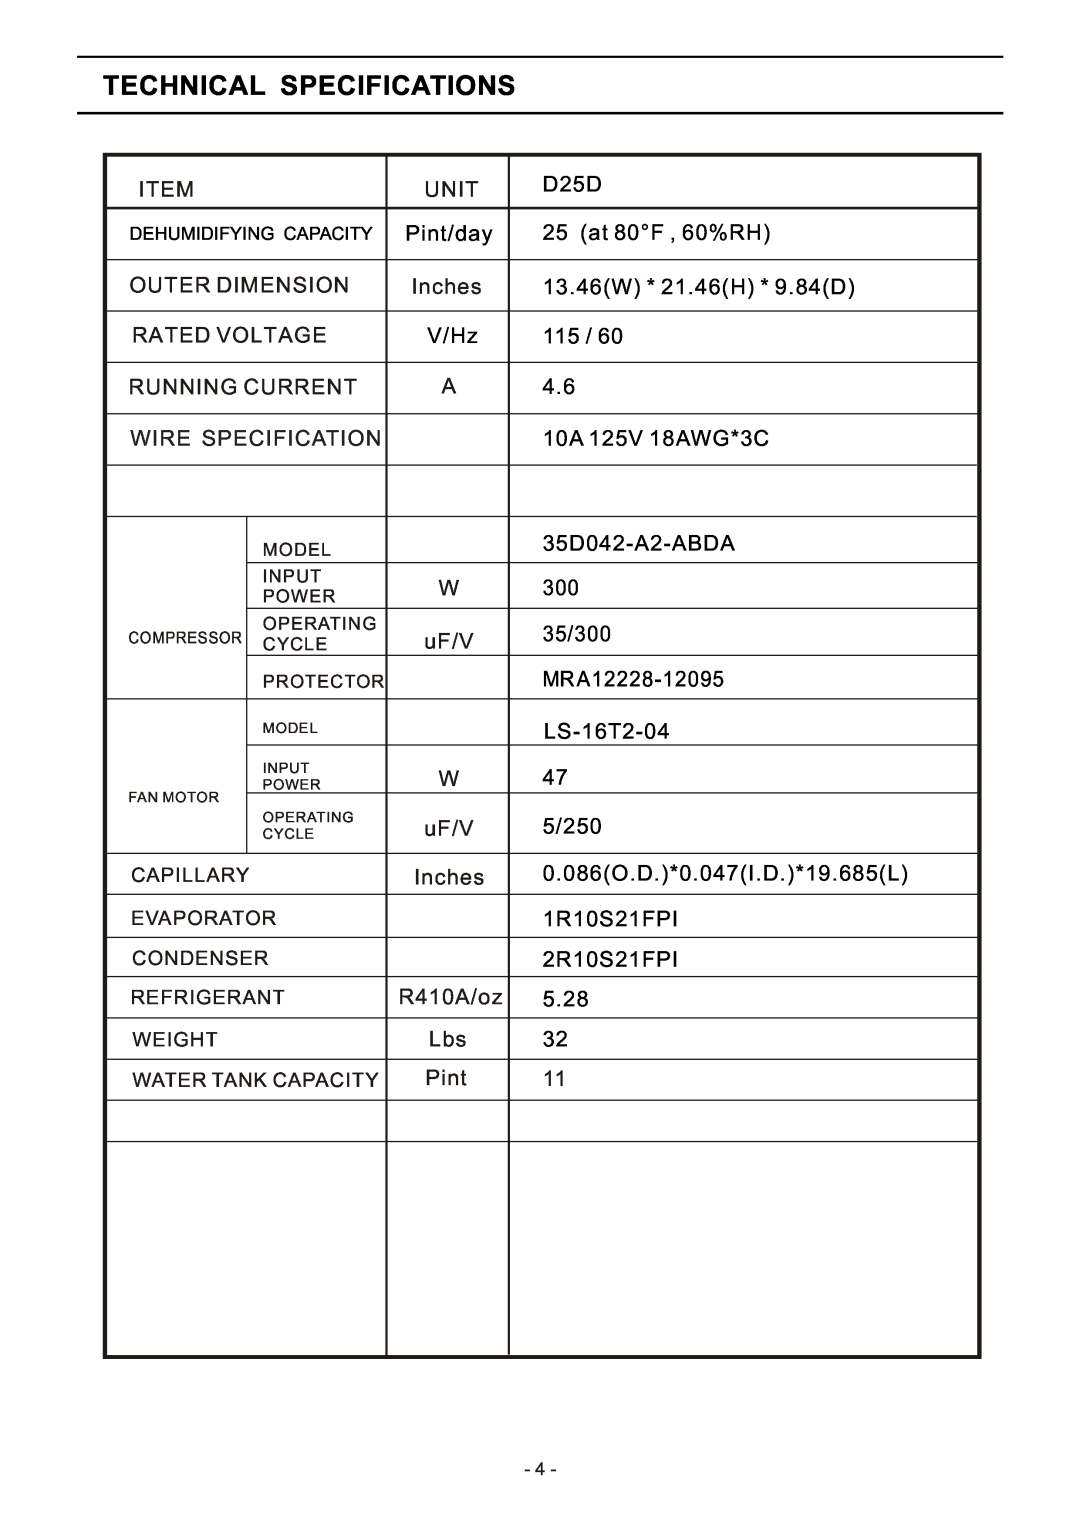 Friedrich Dehumidifier Technical Specifications, Wire Specification, Unit, Outer Dimension, Inches, Rated Voltage, uF/V 